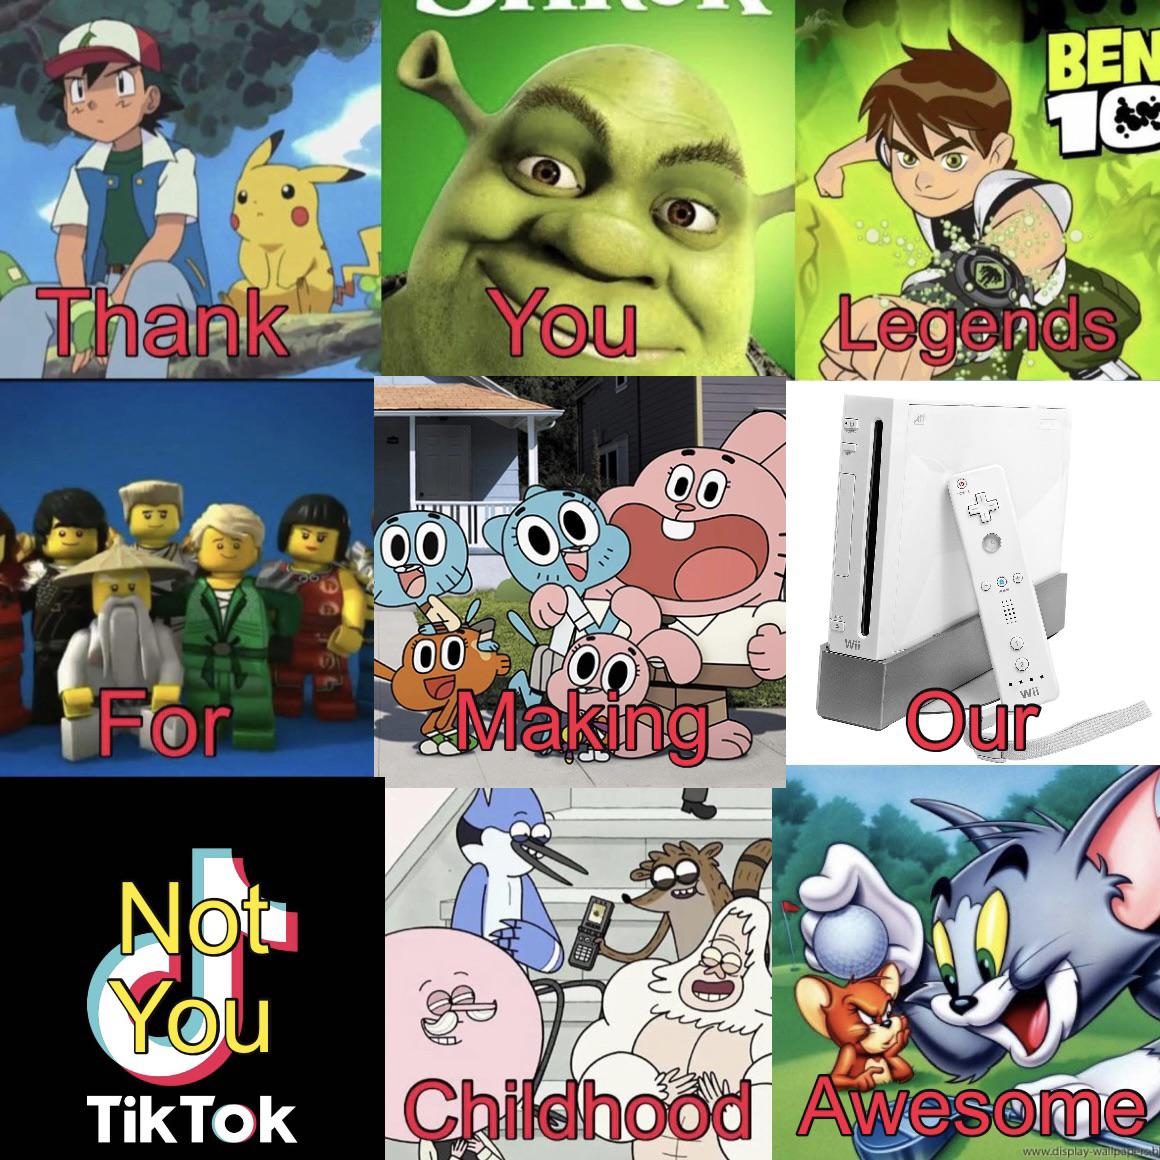 funny memes - ben 10 - Thank You For 0 Not You Tik Tok 00 Making Ben 16 Legends Wii Our k Childhood Awesome